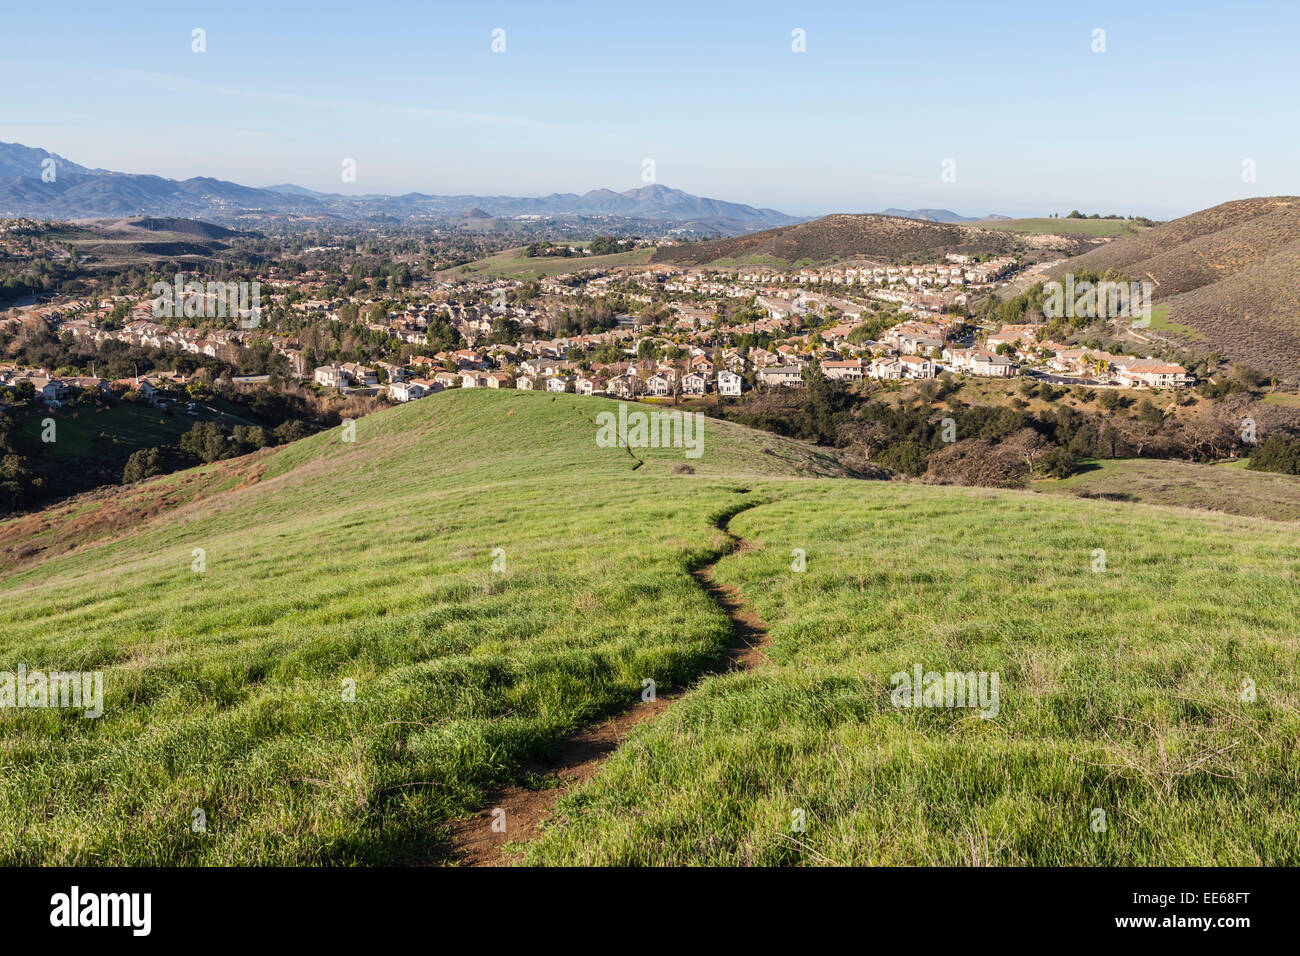 Suburban meadow hiking trail leading to upscale modern homes near Los Angeles in Thousand Oaks, California. Stock Photo